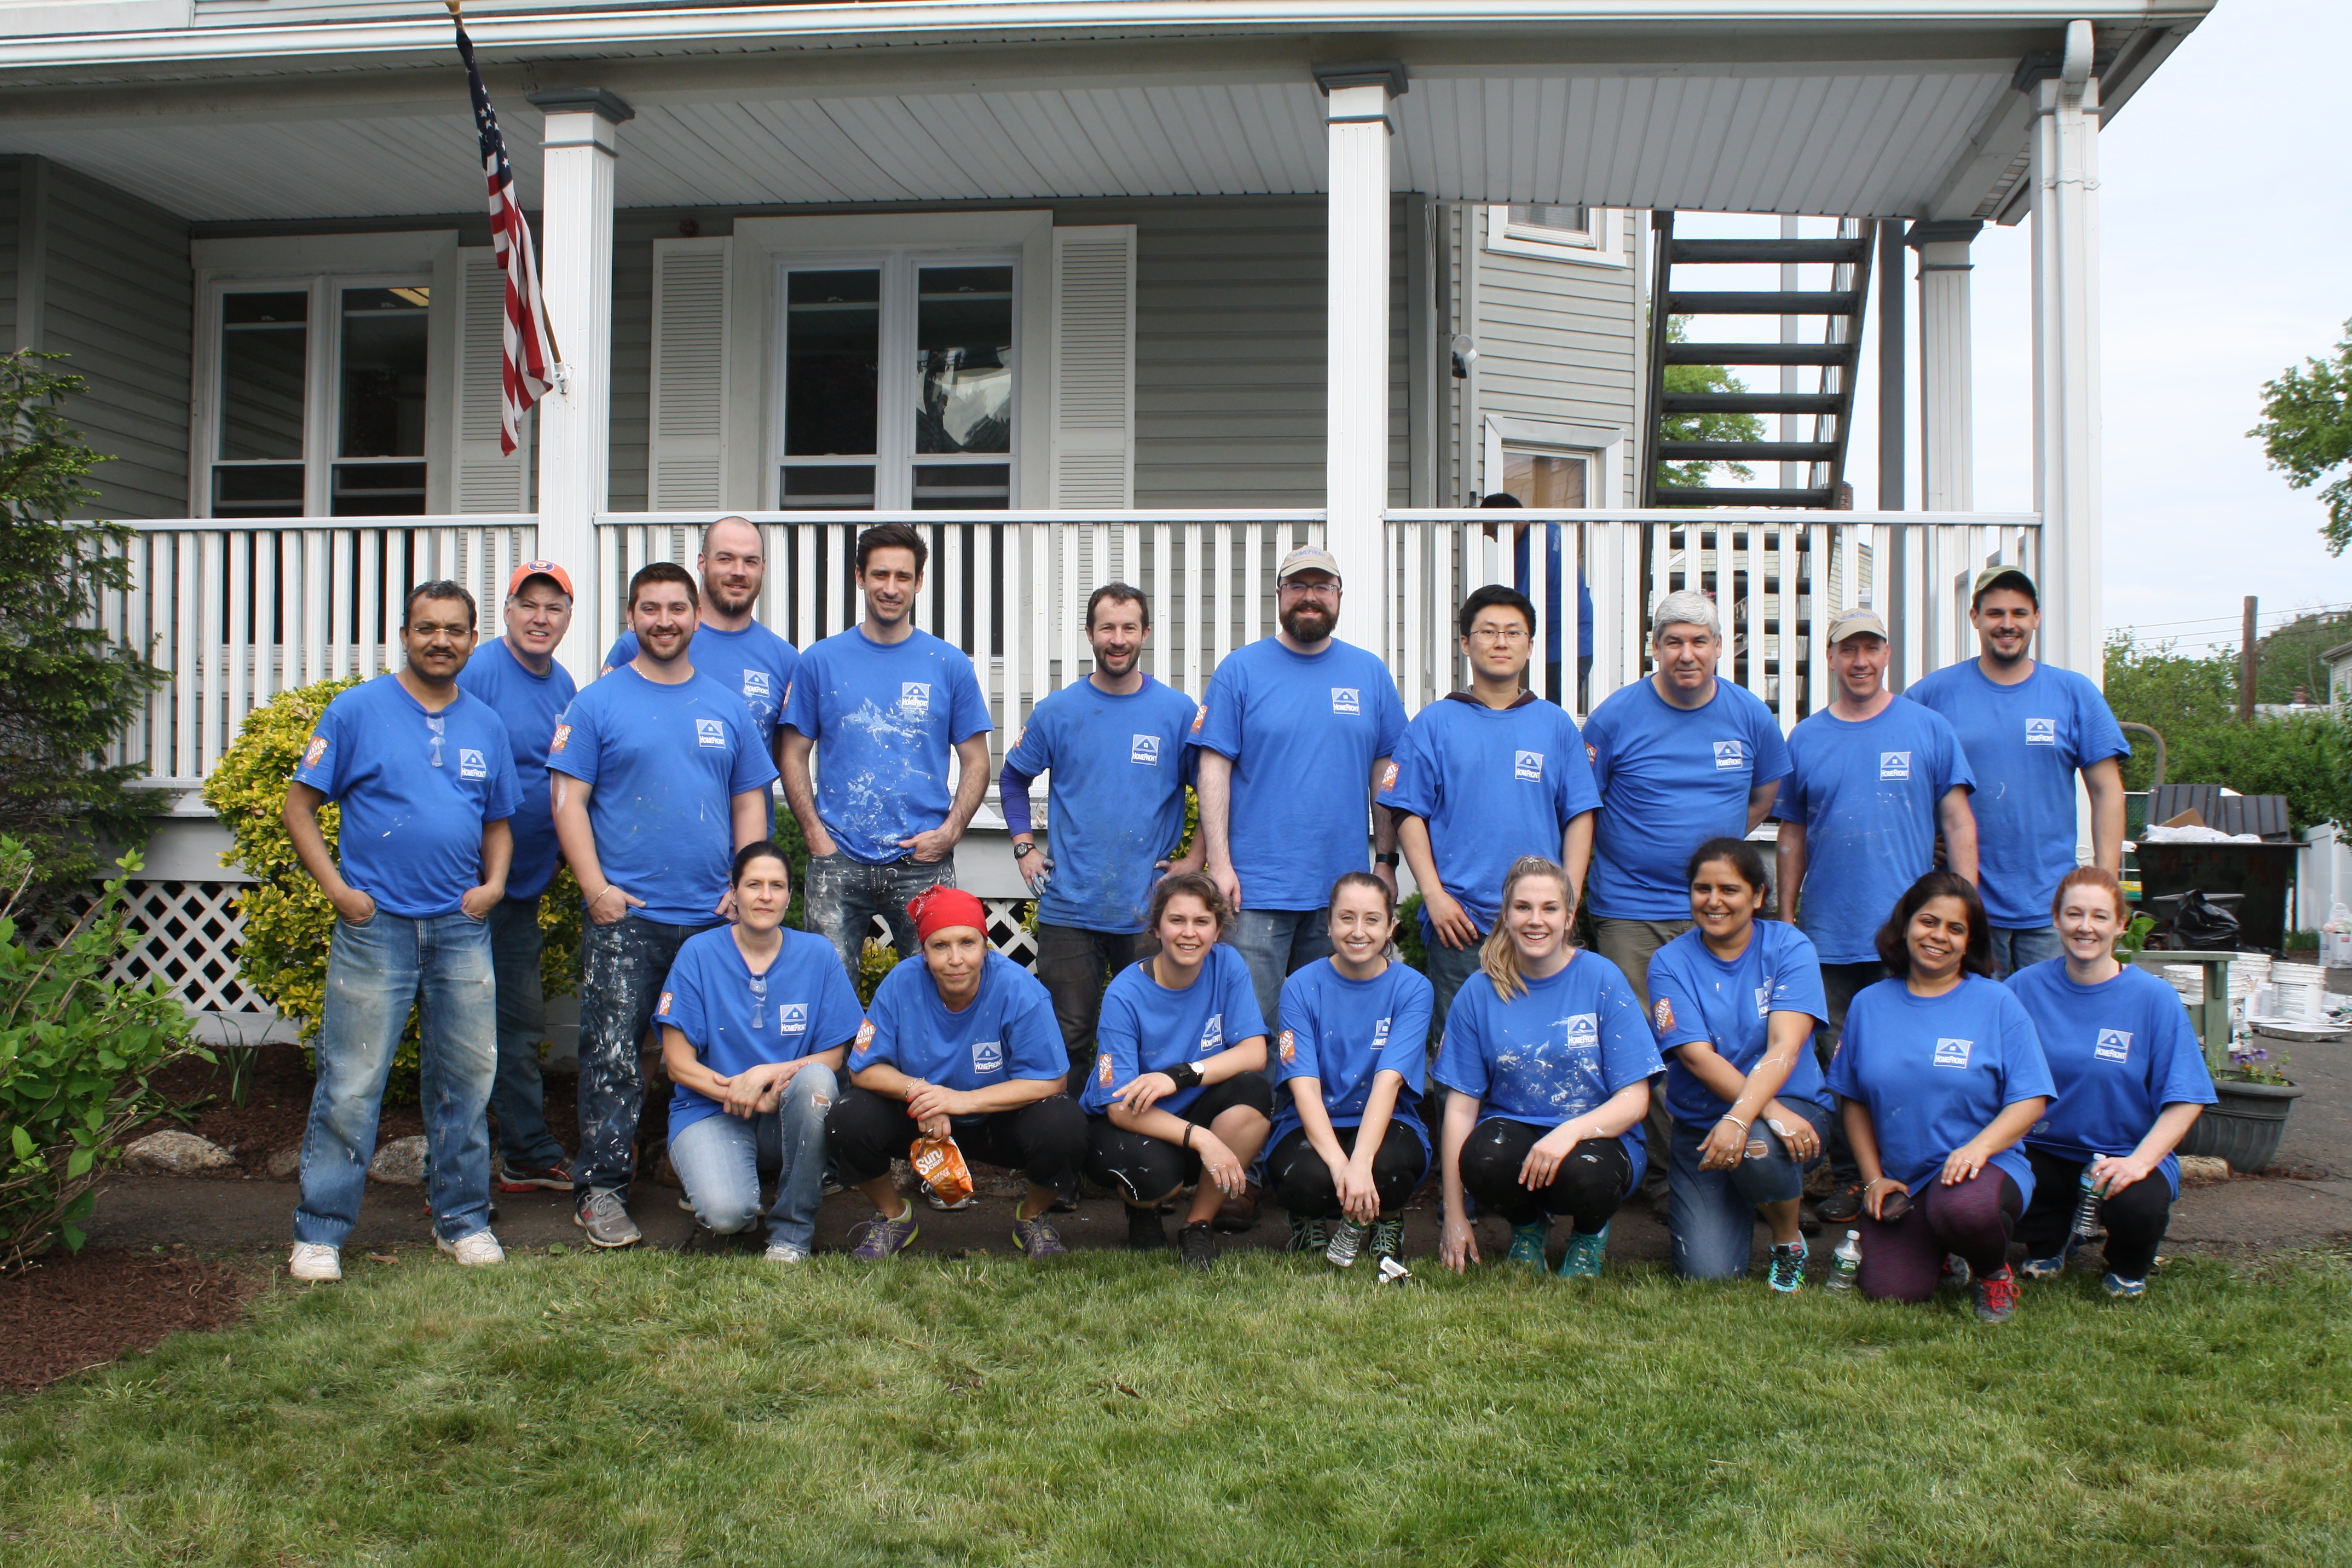 Volunteers at a Domus property for painting, construction, and gardening